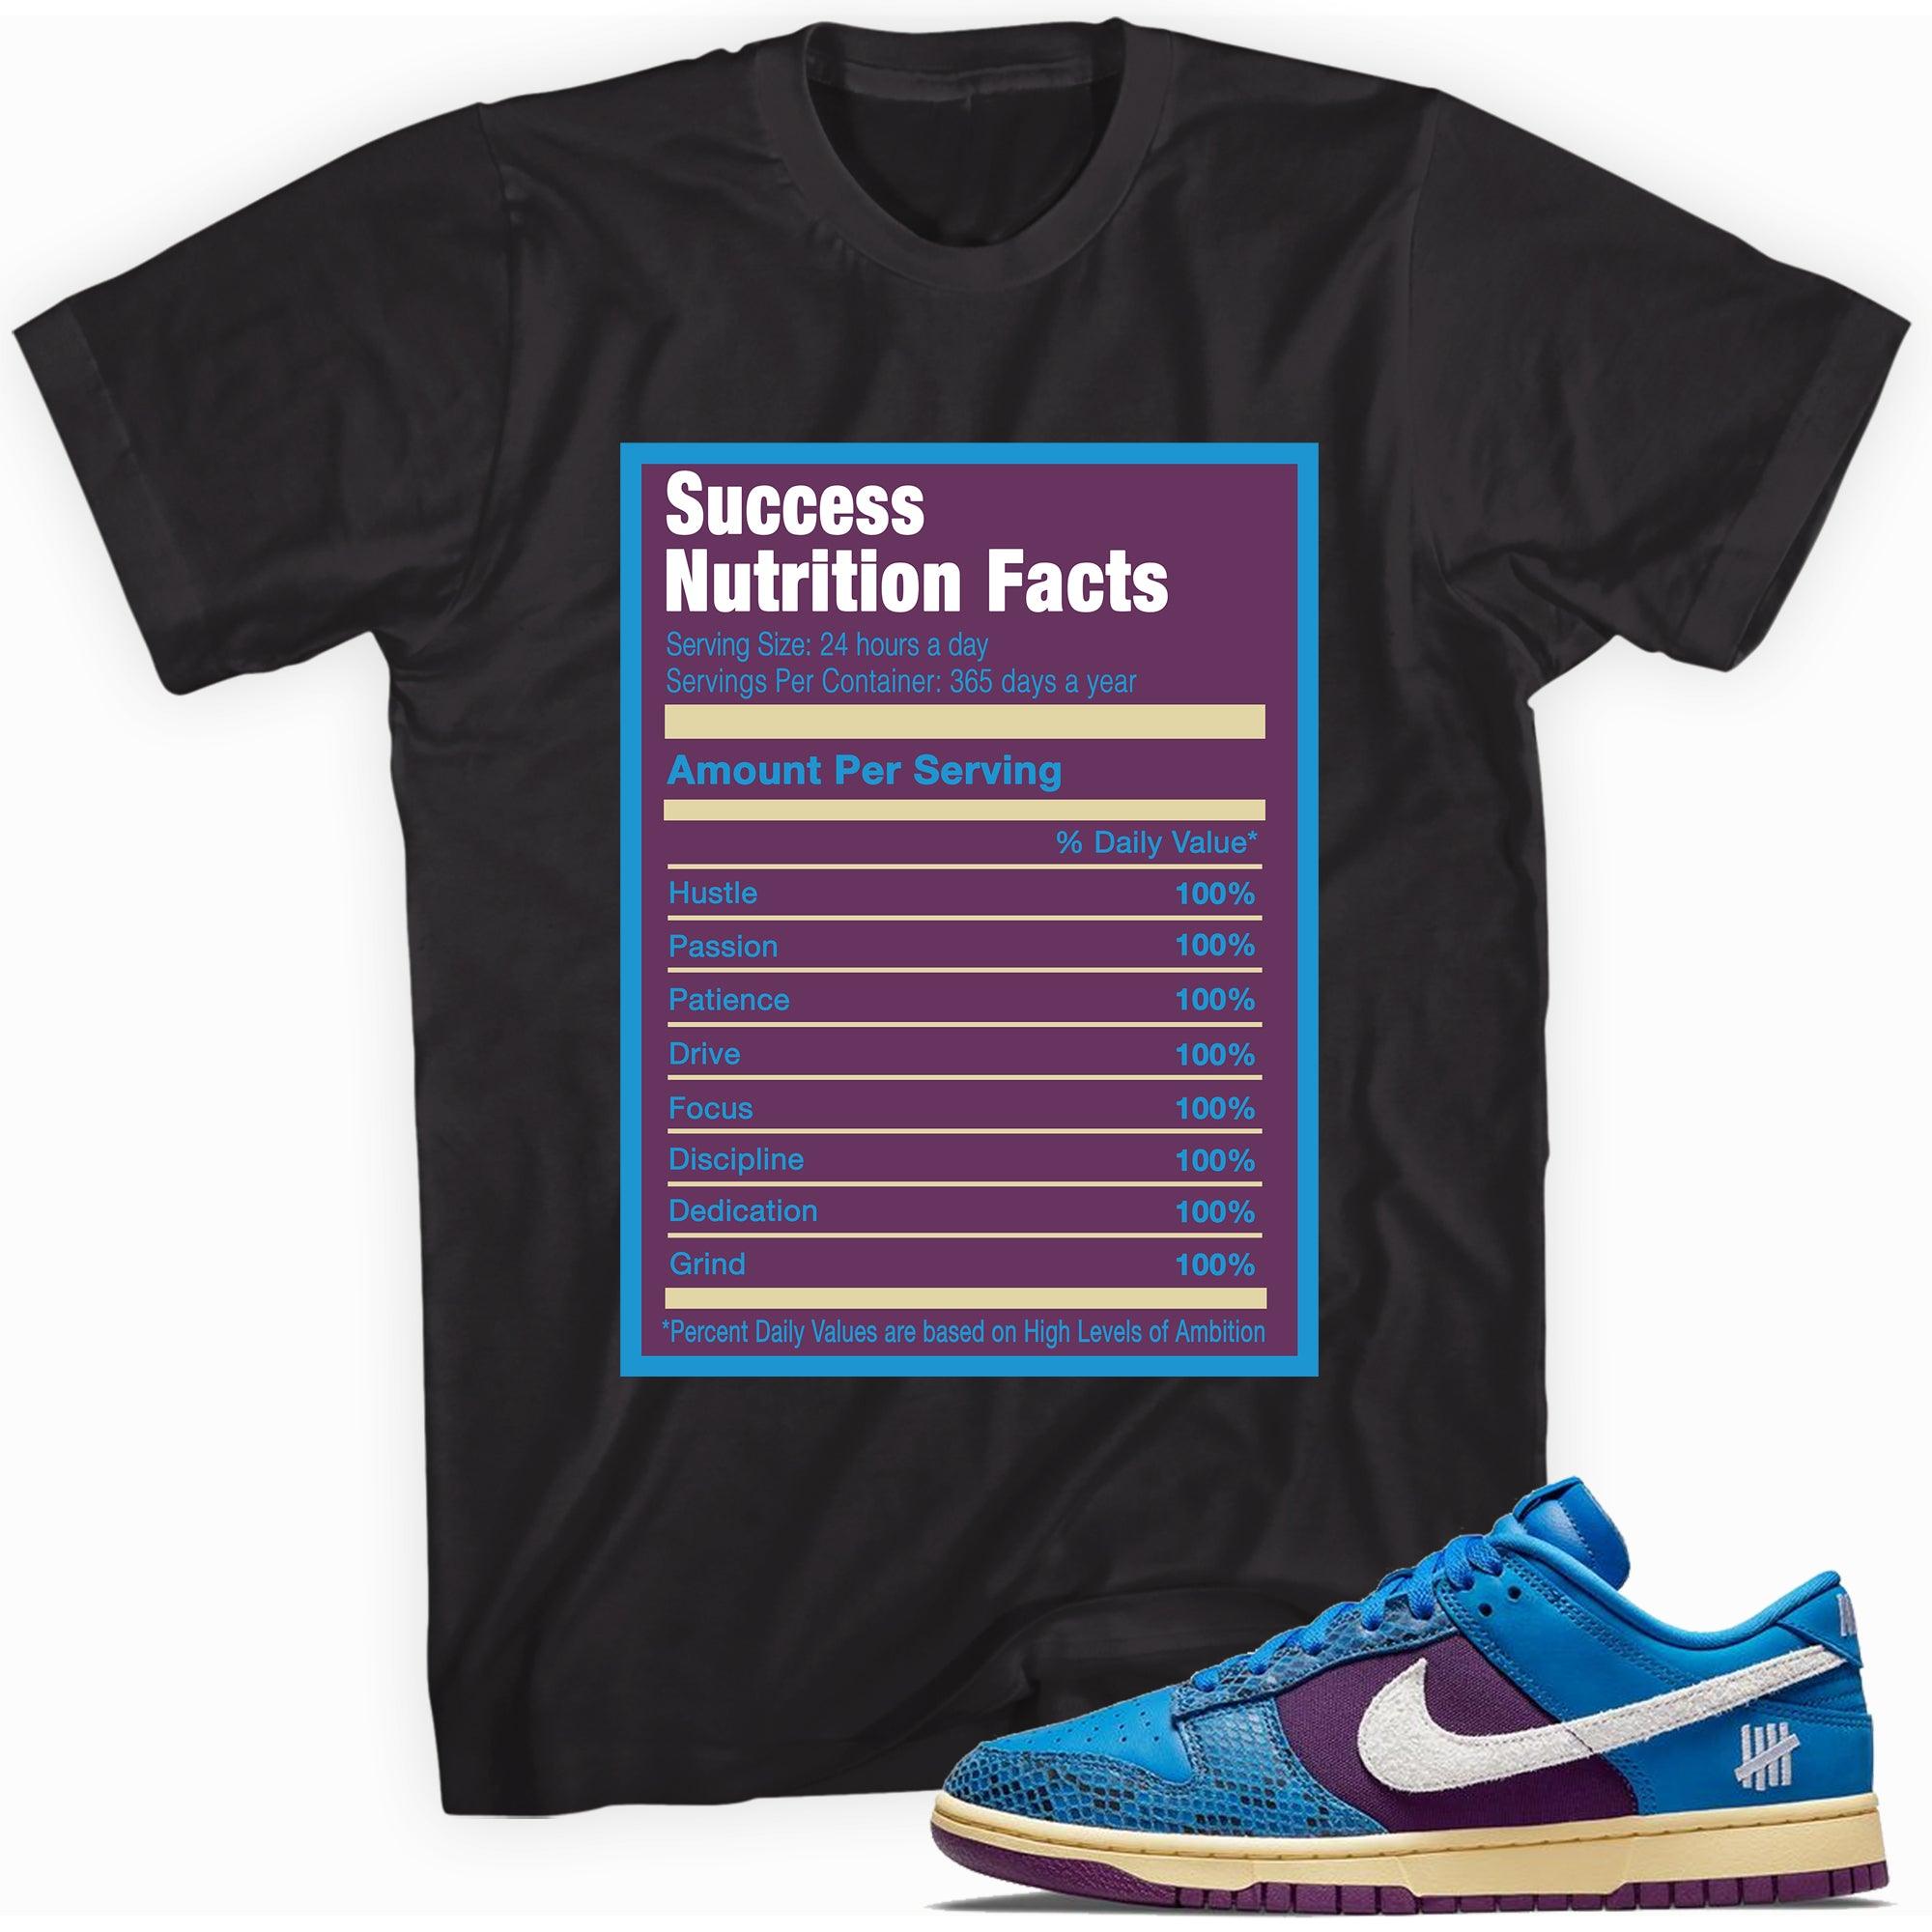 Black Success Nutrition Facts Shirt Nike Dunks Low Undefeated 5 On It Dunk vs AF1 photo